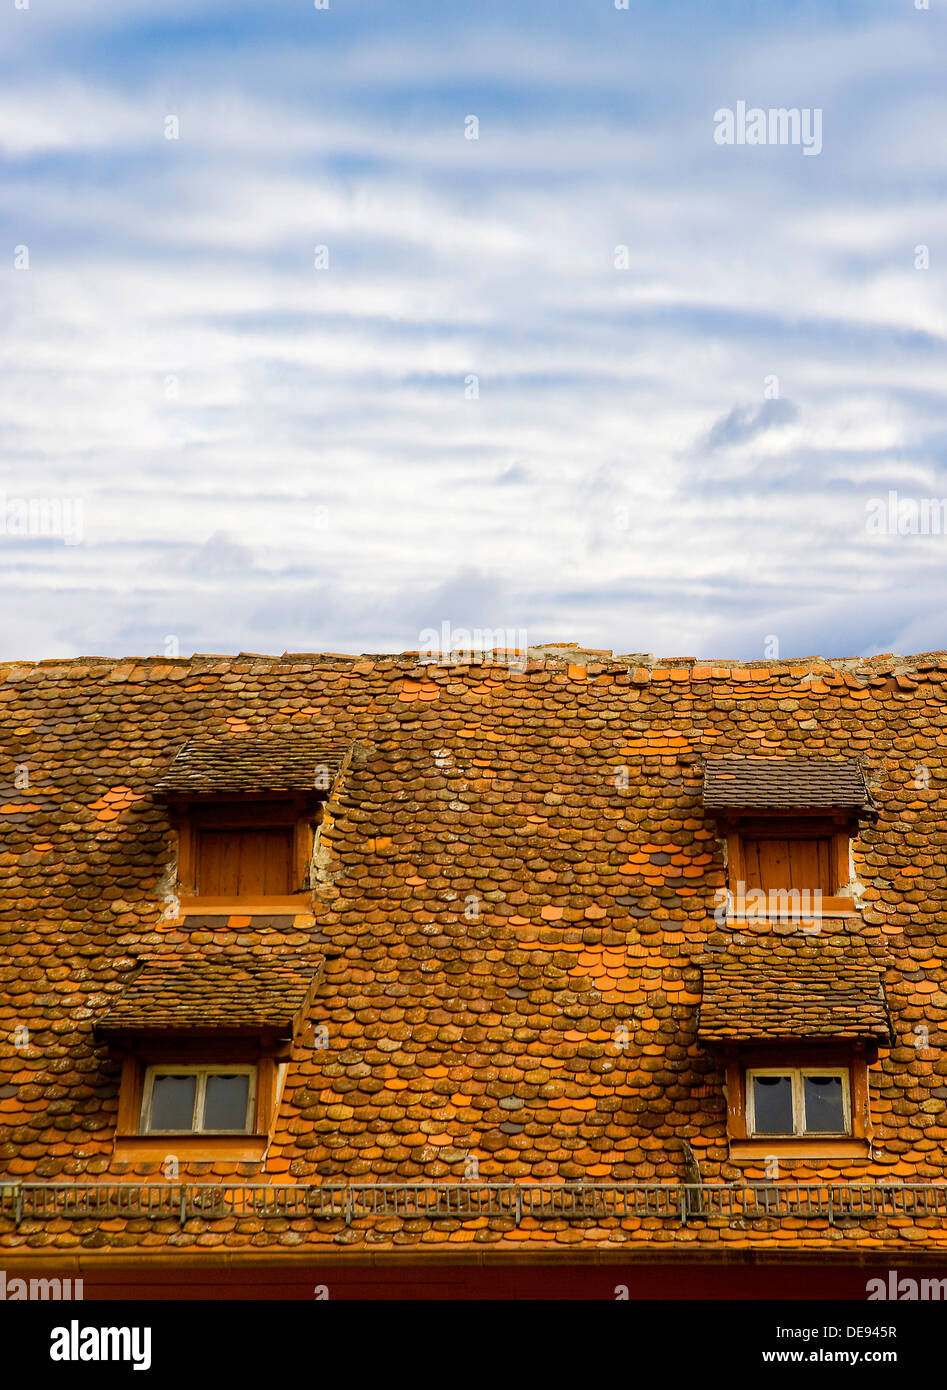 Tiled Roof with Four Dormer Windows Stock Photo